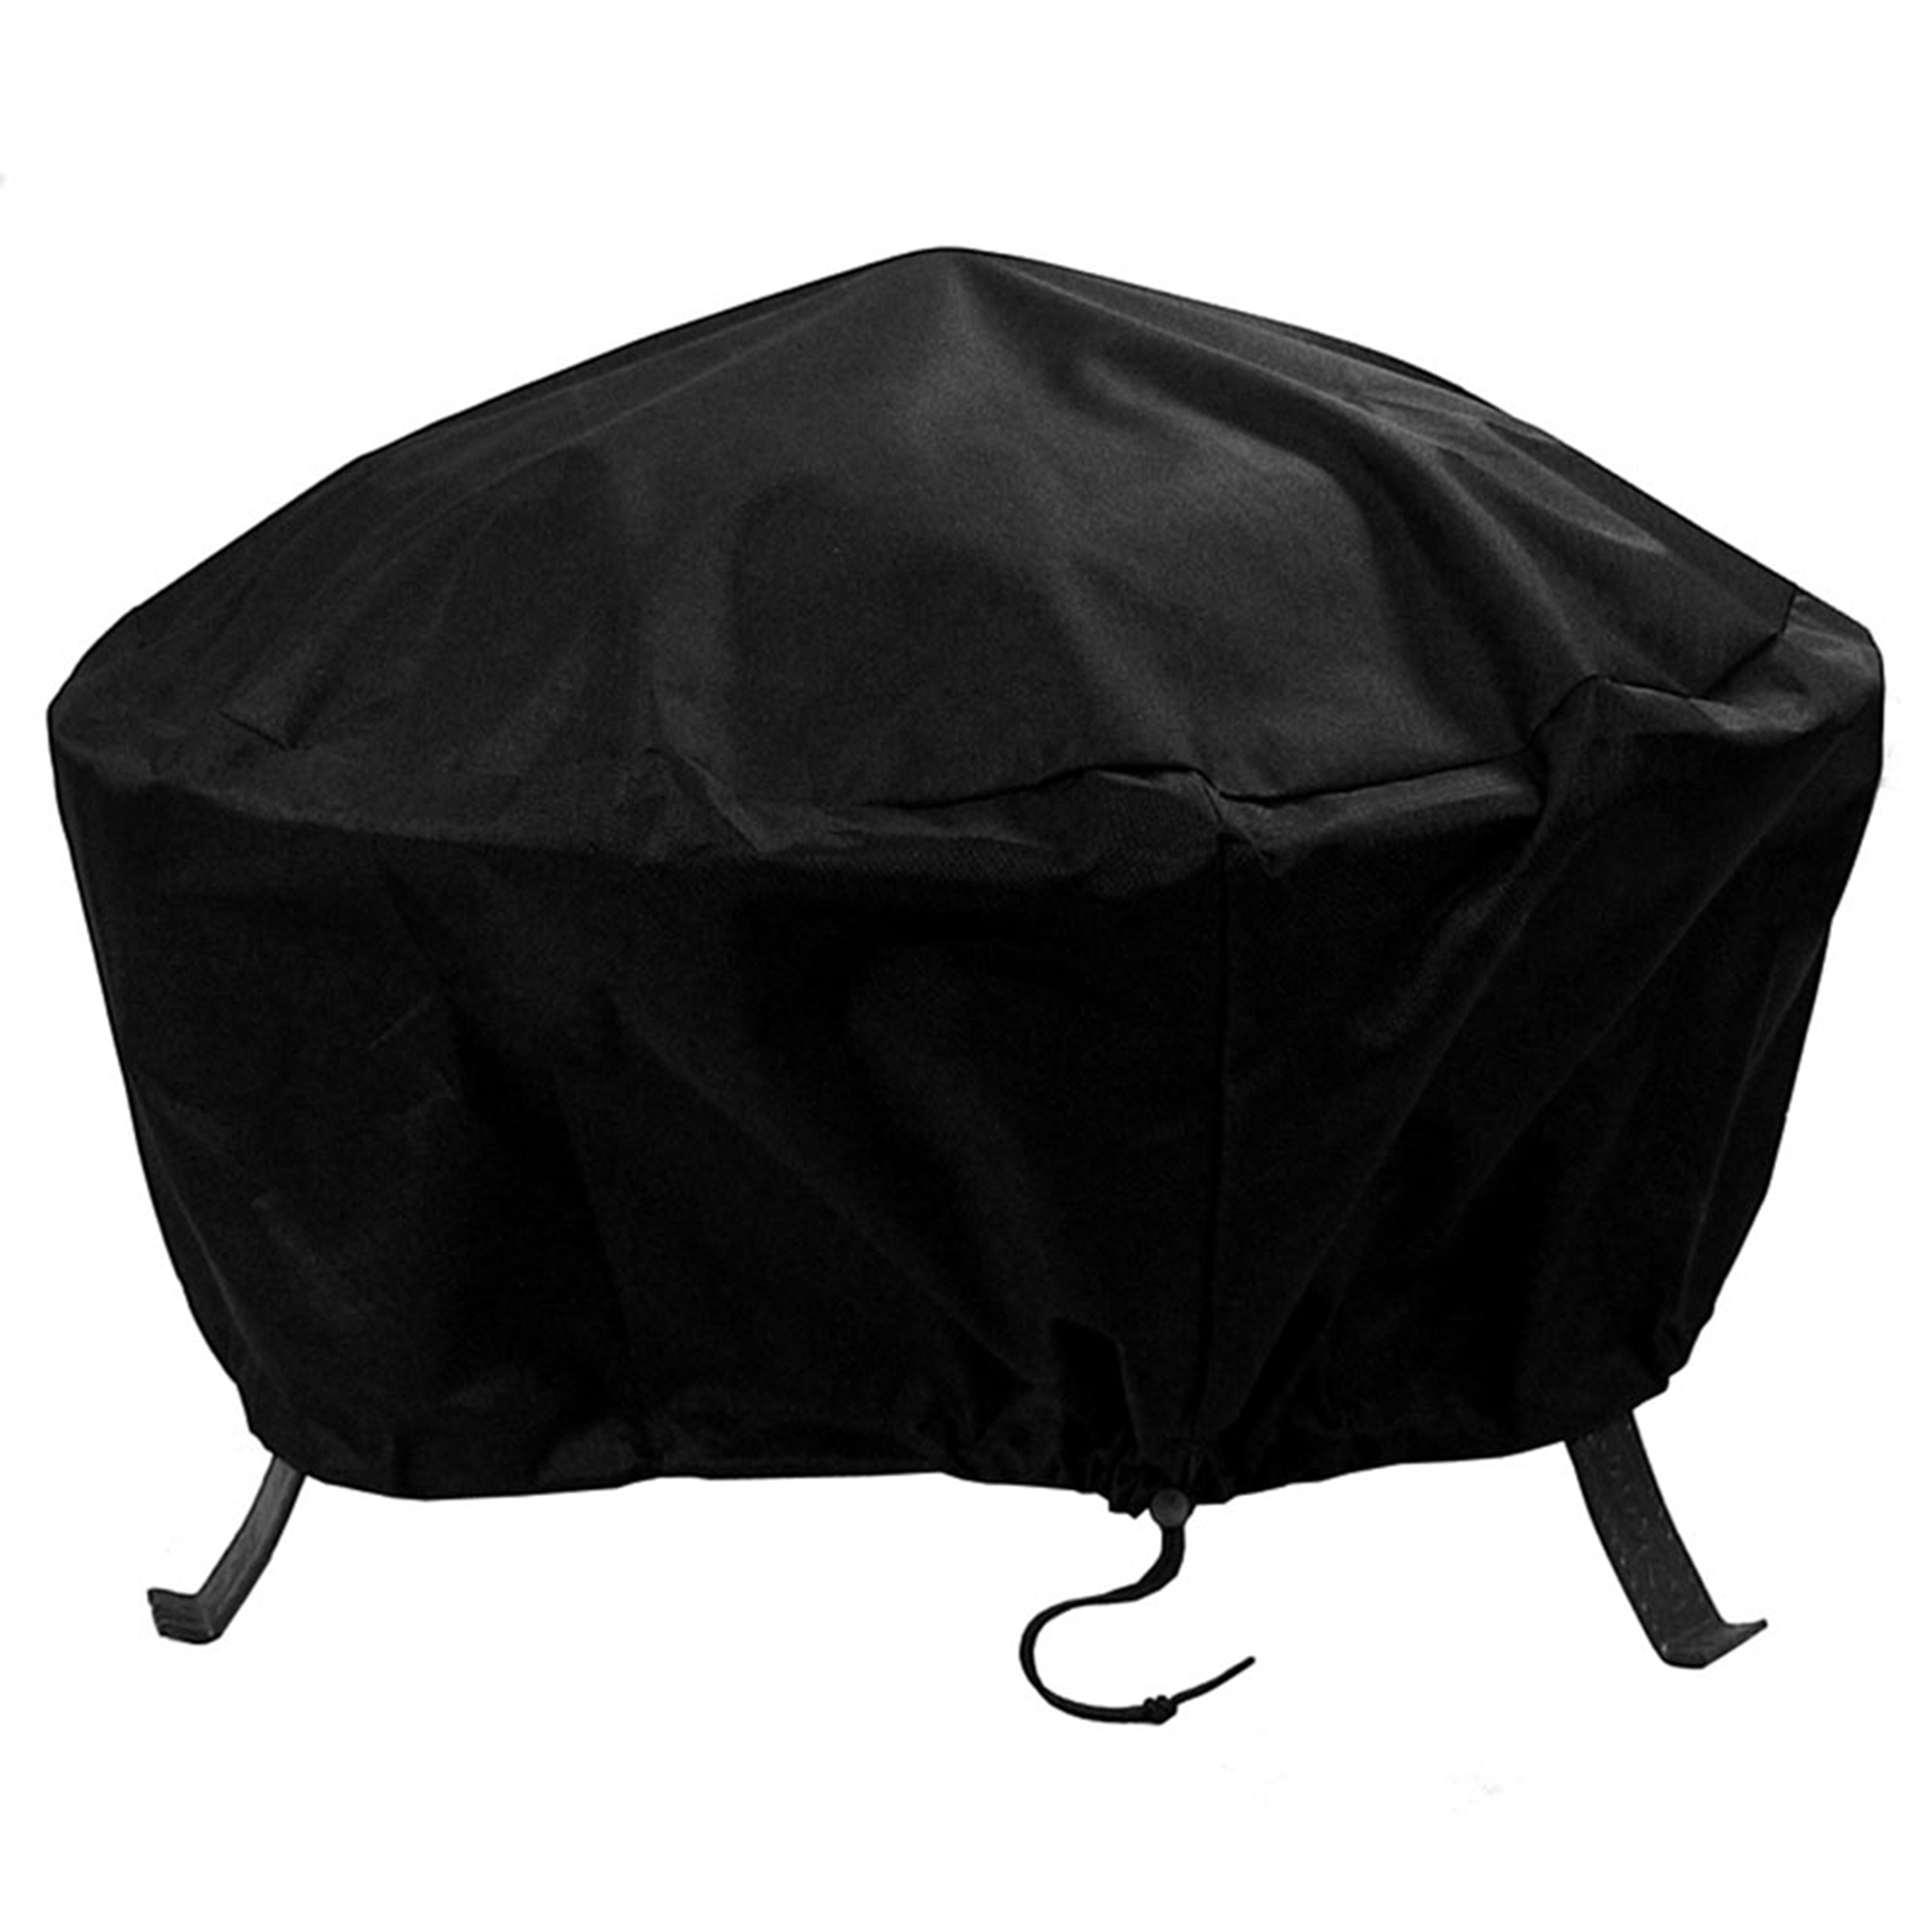 Sunnydaze Round Black Fire Pit Cover, Size Options Available, 40-inch Diameter